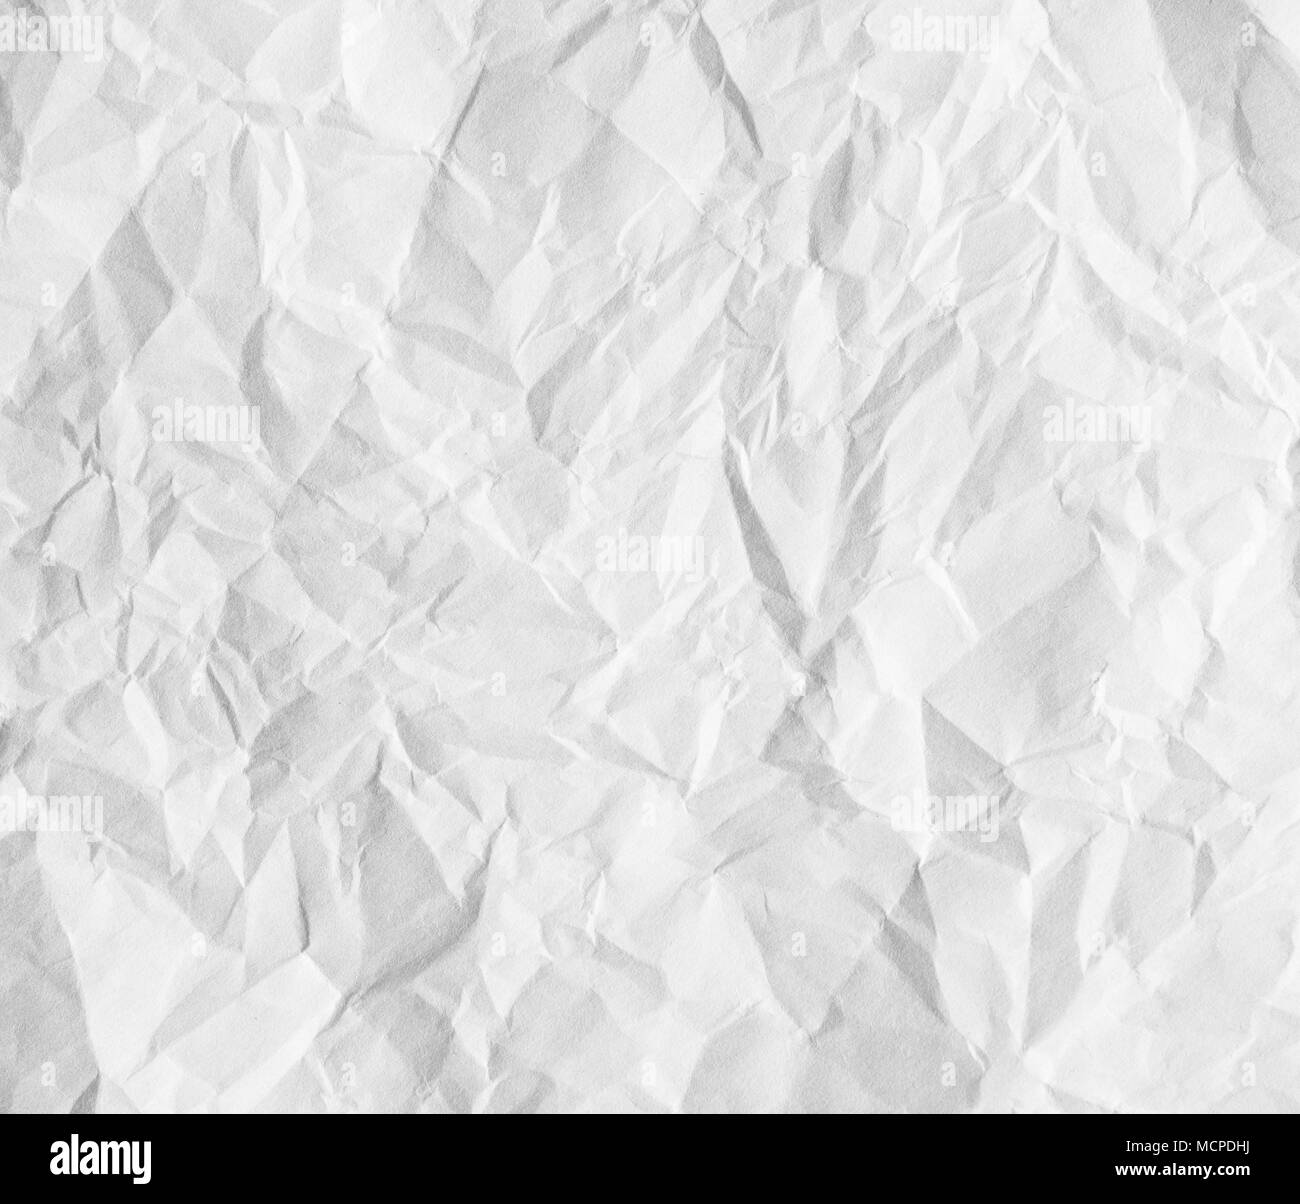 White Drawing Paper Texture Background with Glitter Stones Texture,  Suitable for Backdrop and Scrapbook Making Stock Photo - Alamy